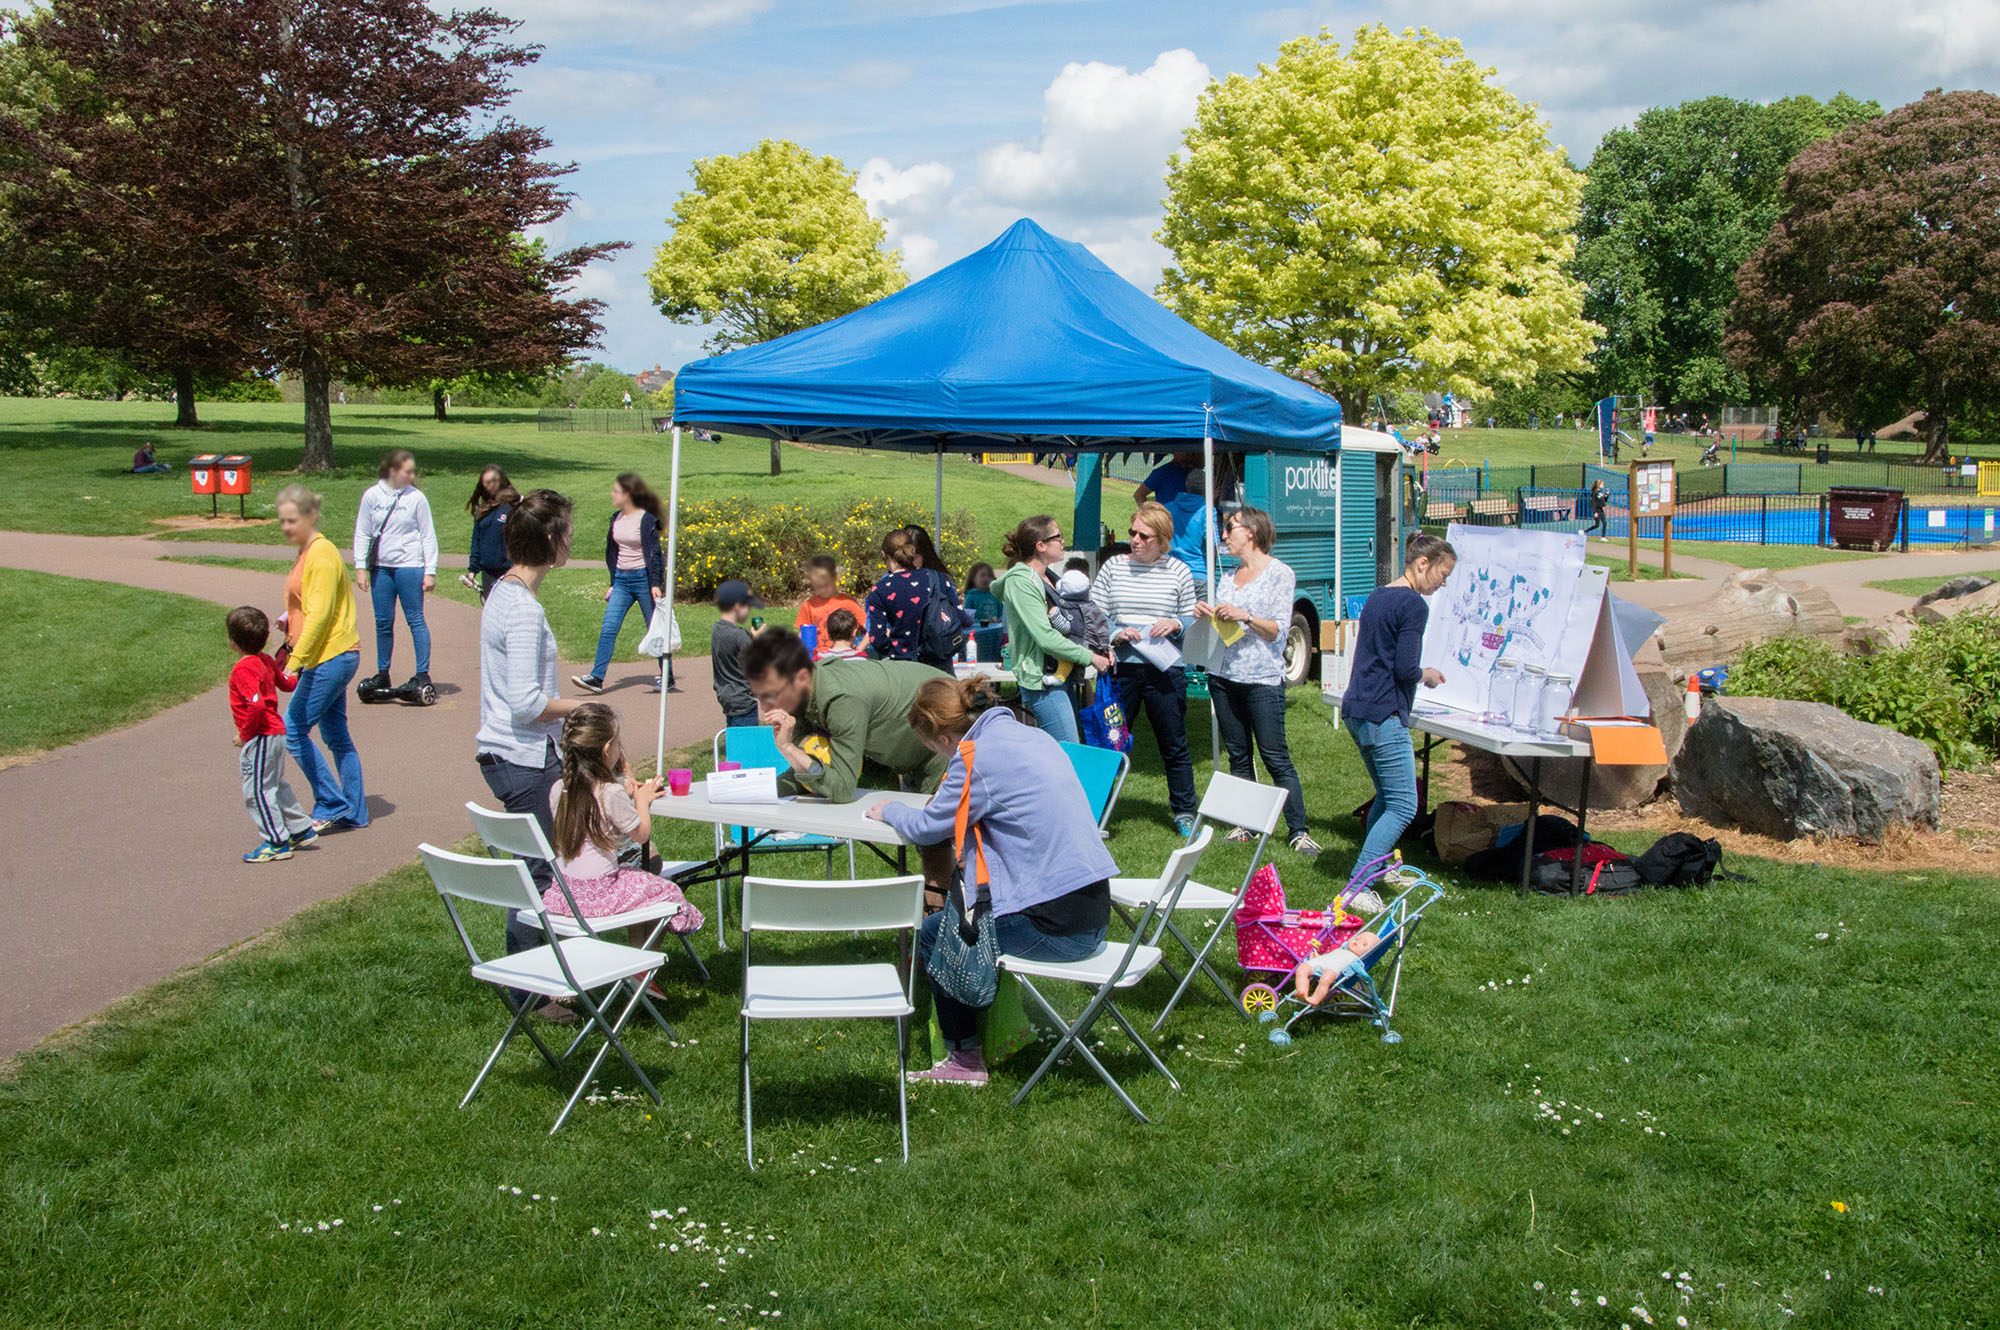 A photgraph of a community engagement event in a Heavitree Park with gazebo